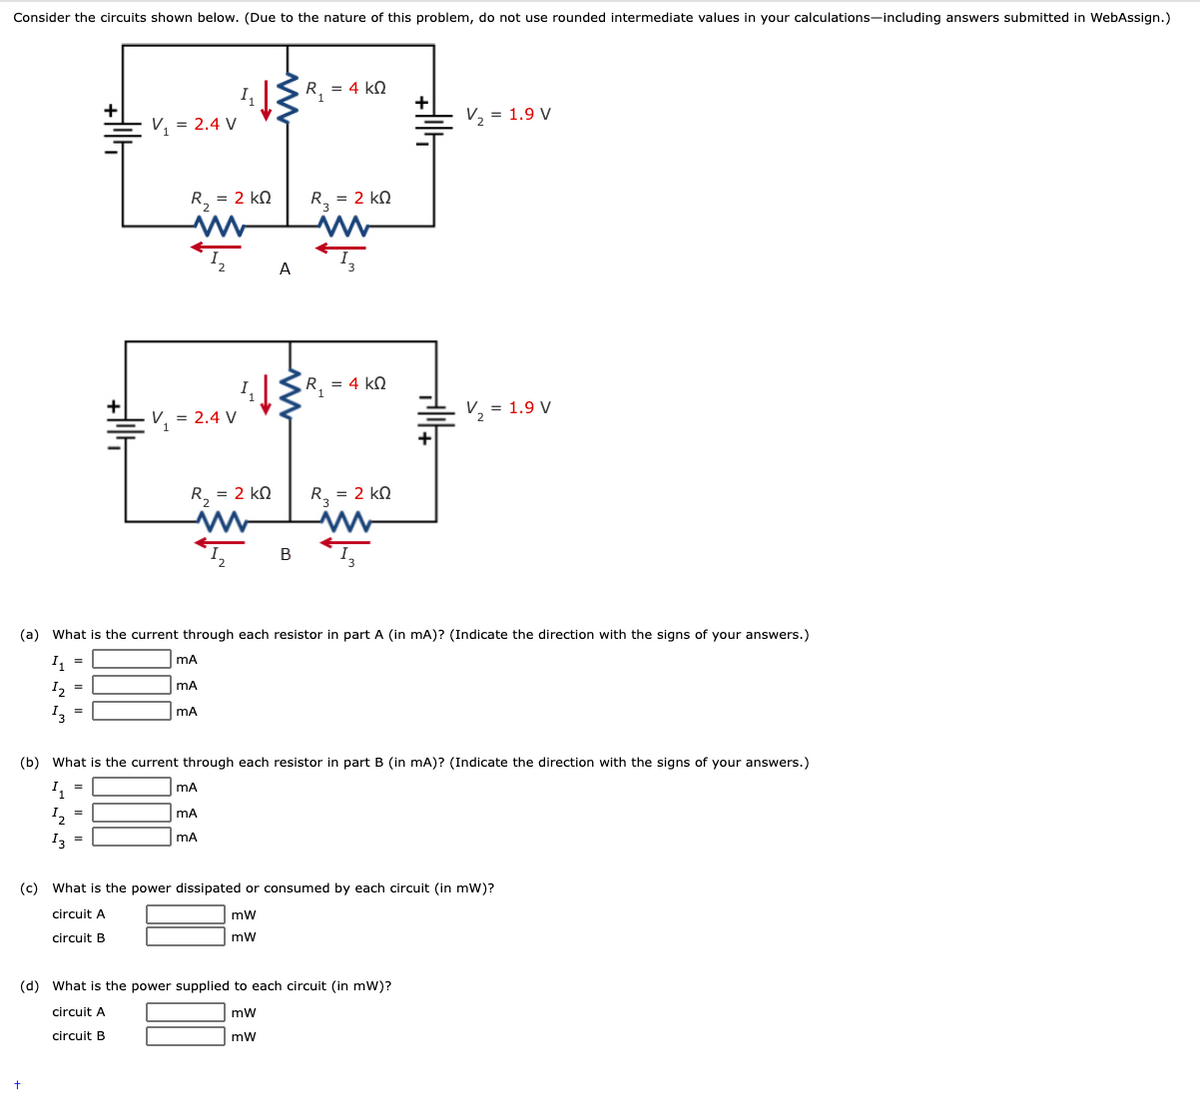 Consider the circuits shown below. (Due to the nature of this problem, do not use rounded intermediate values in your calculations-including answers submitted in WebAssign.)
R, = 4 kN
V, = 2.4 V
V, = 1.9 V
R, = 2 kN
R, = 2 kN
A
R, = 4 kN
V, = 2.4 V
V, = 1.9 V
R, = 2 kN
R, = 2 kN
В
(a) What is the current through each resistor in part A (in mA)? (Indicate the direction with the signs of your answers.)
I, =
mA
I2 =
I, =
mA
(b) What is the current through each resistor in part B (in mA)? (Indicate the direction with the signs of your answers.)
I, =
I, =
mA
I3 =
mA
(c) What is the power dissipated or consumed by each circuit (in mWw)?
circuit A
circuit B
mw
(d) What is the power supplied to each circuit (in mW)?
circuit A
mw
circuit B
mw
